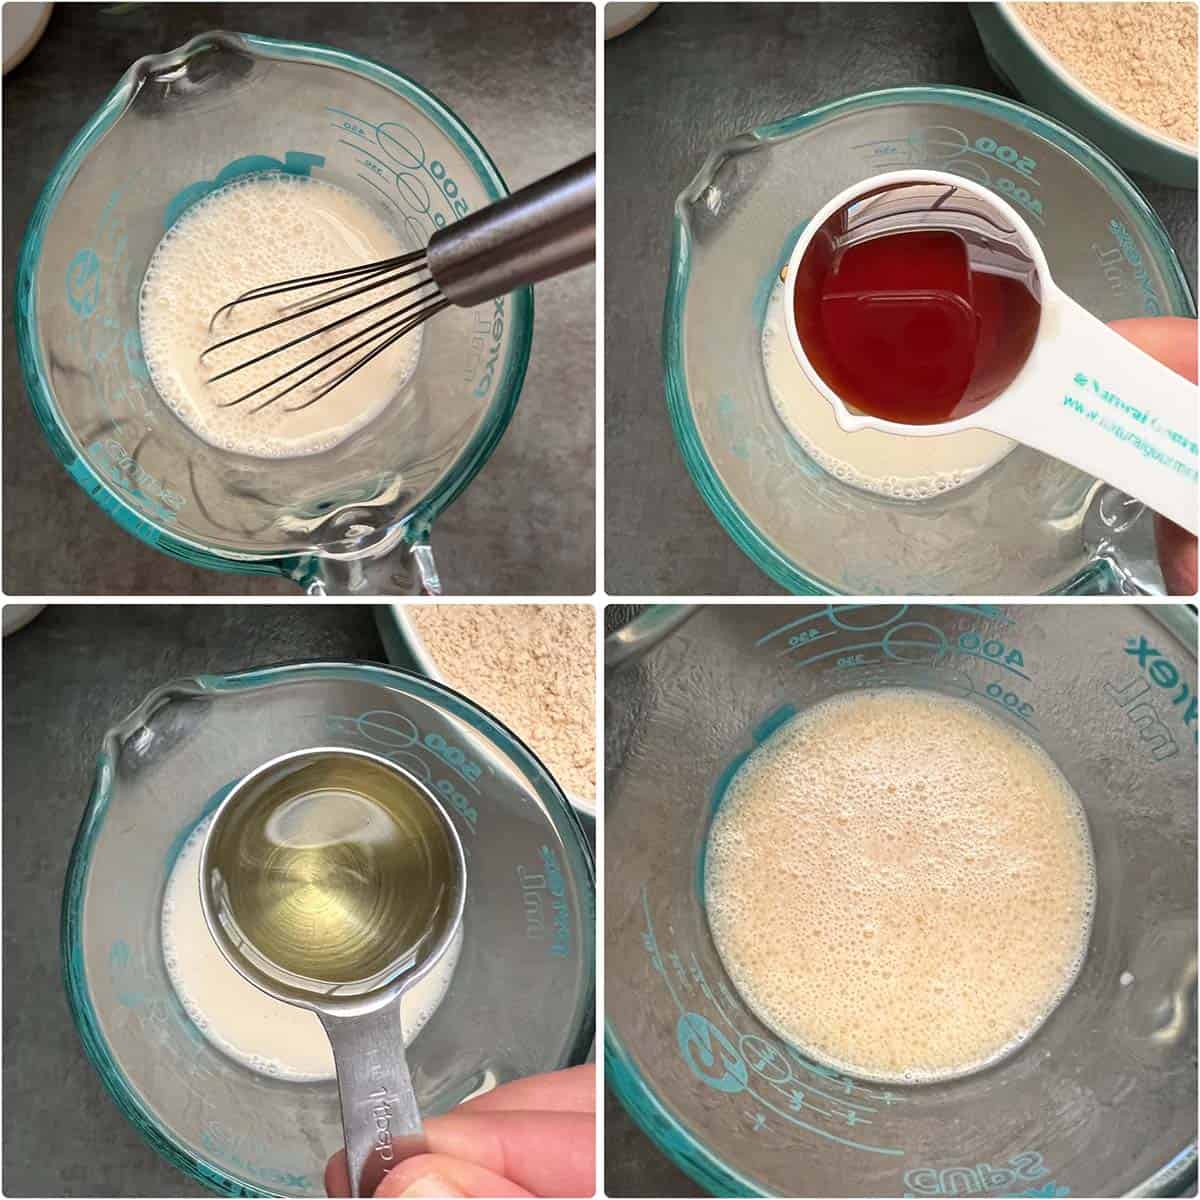 4 panel photo showing the mixing of wet ingredients in a glass jar.